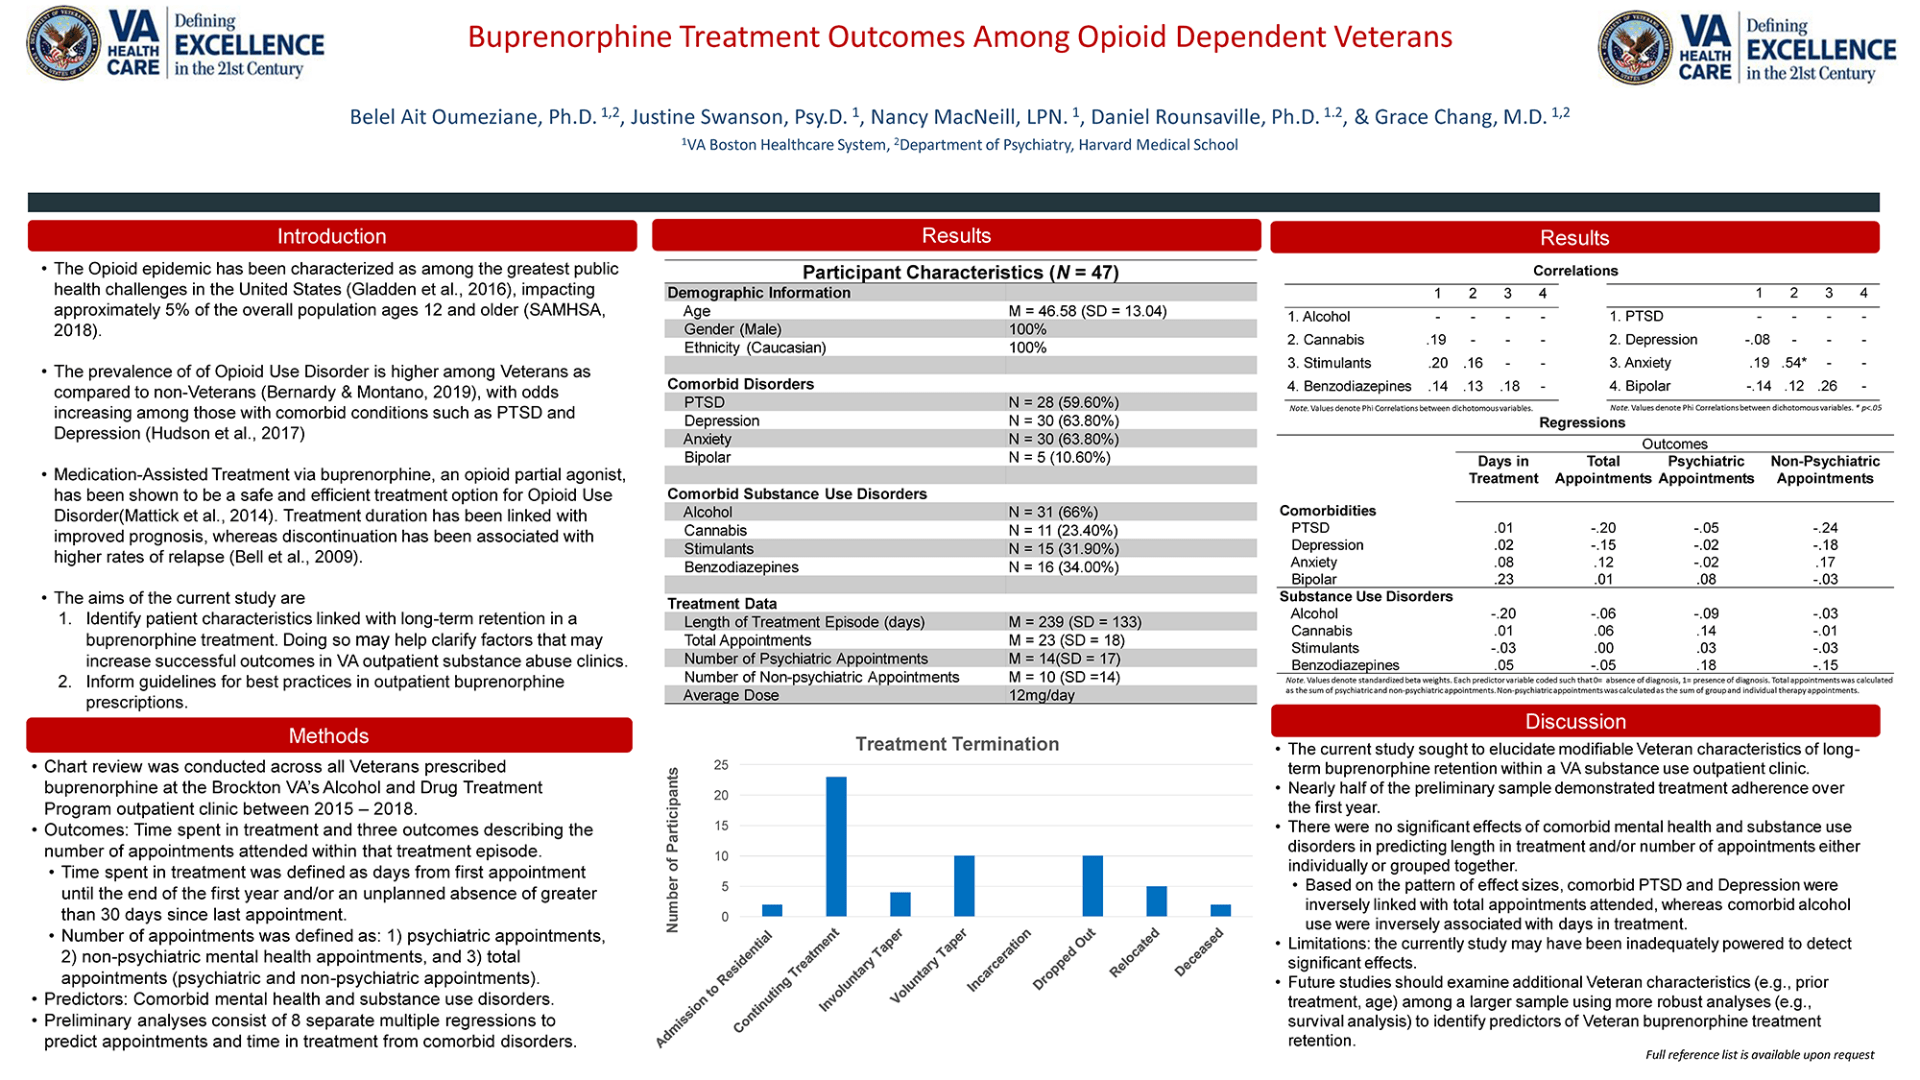 Buprenorphine Treatment Outcomes among Opioid-Dependent Veterans With and Without Post-traumatic Stress Disorder